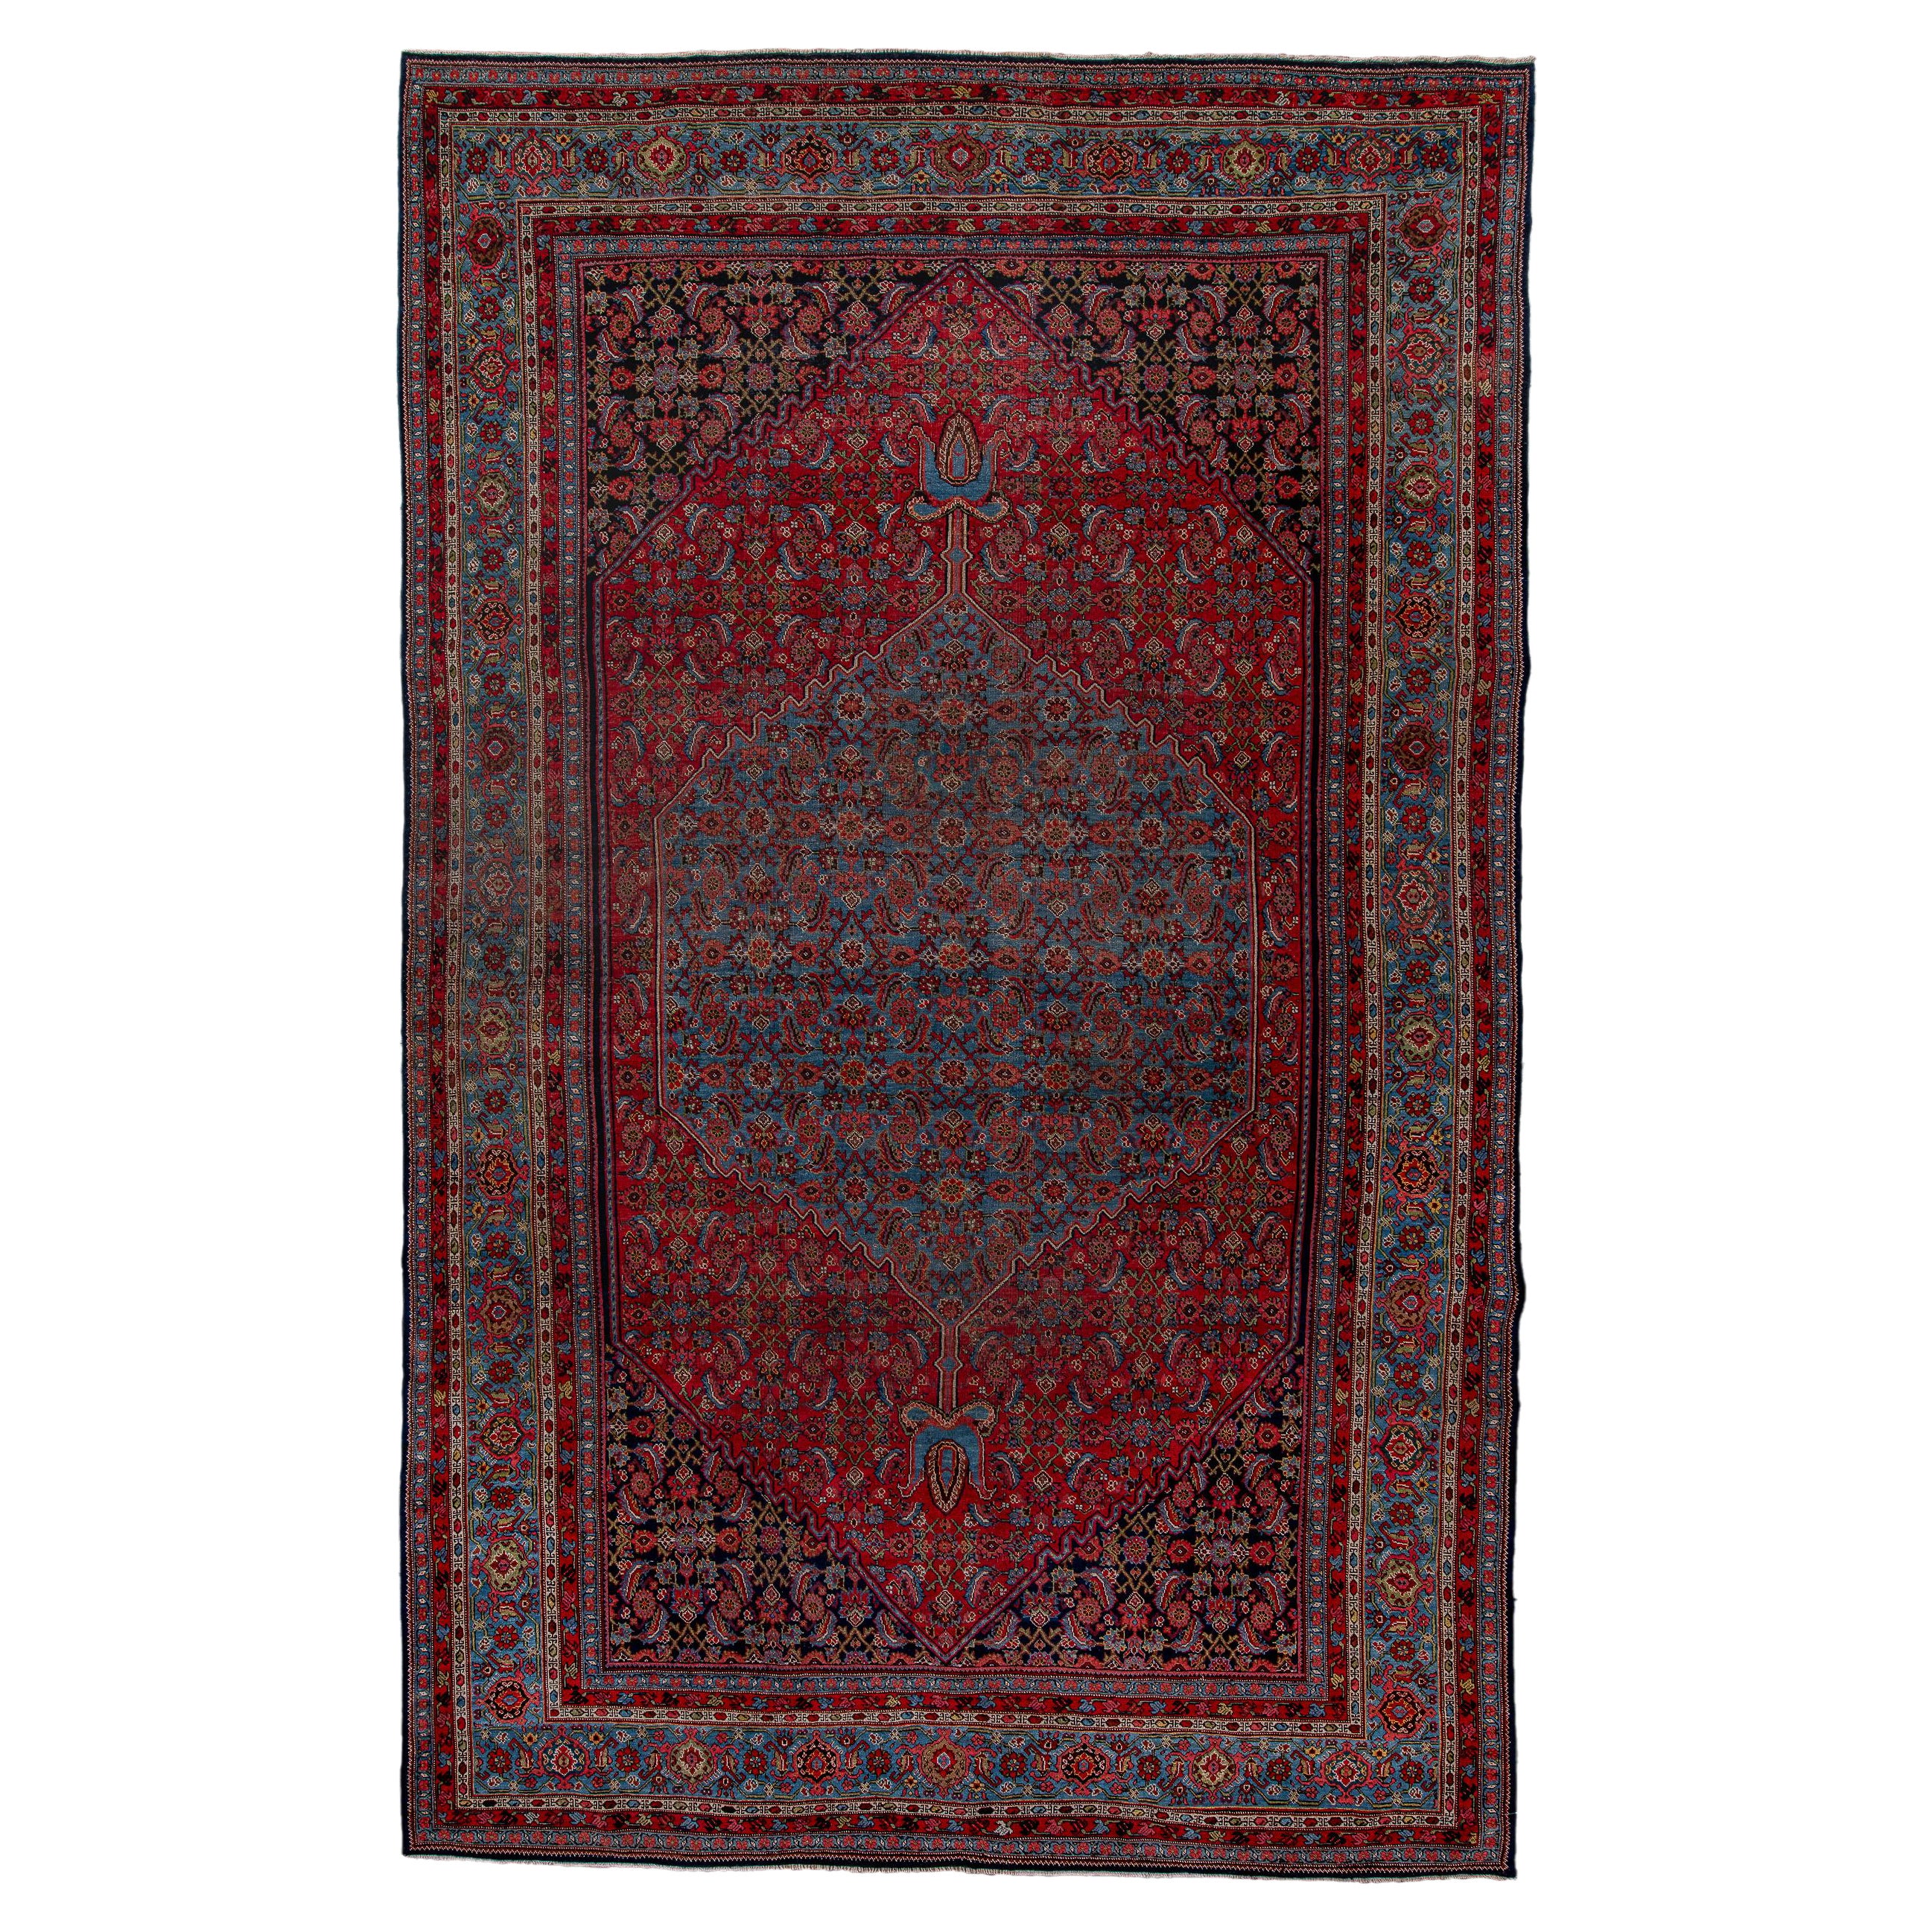 Antique Herati Design with Red Field and Navy Blue Border